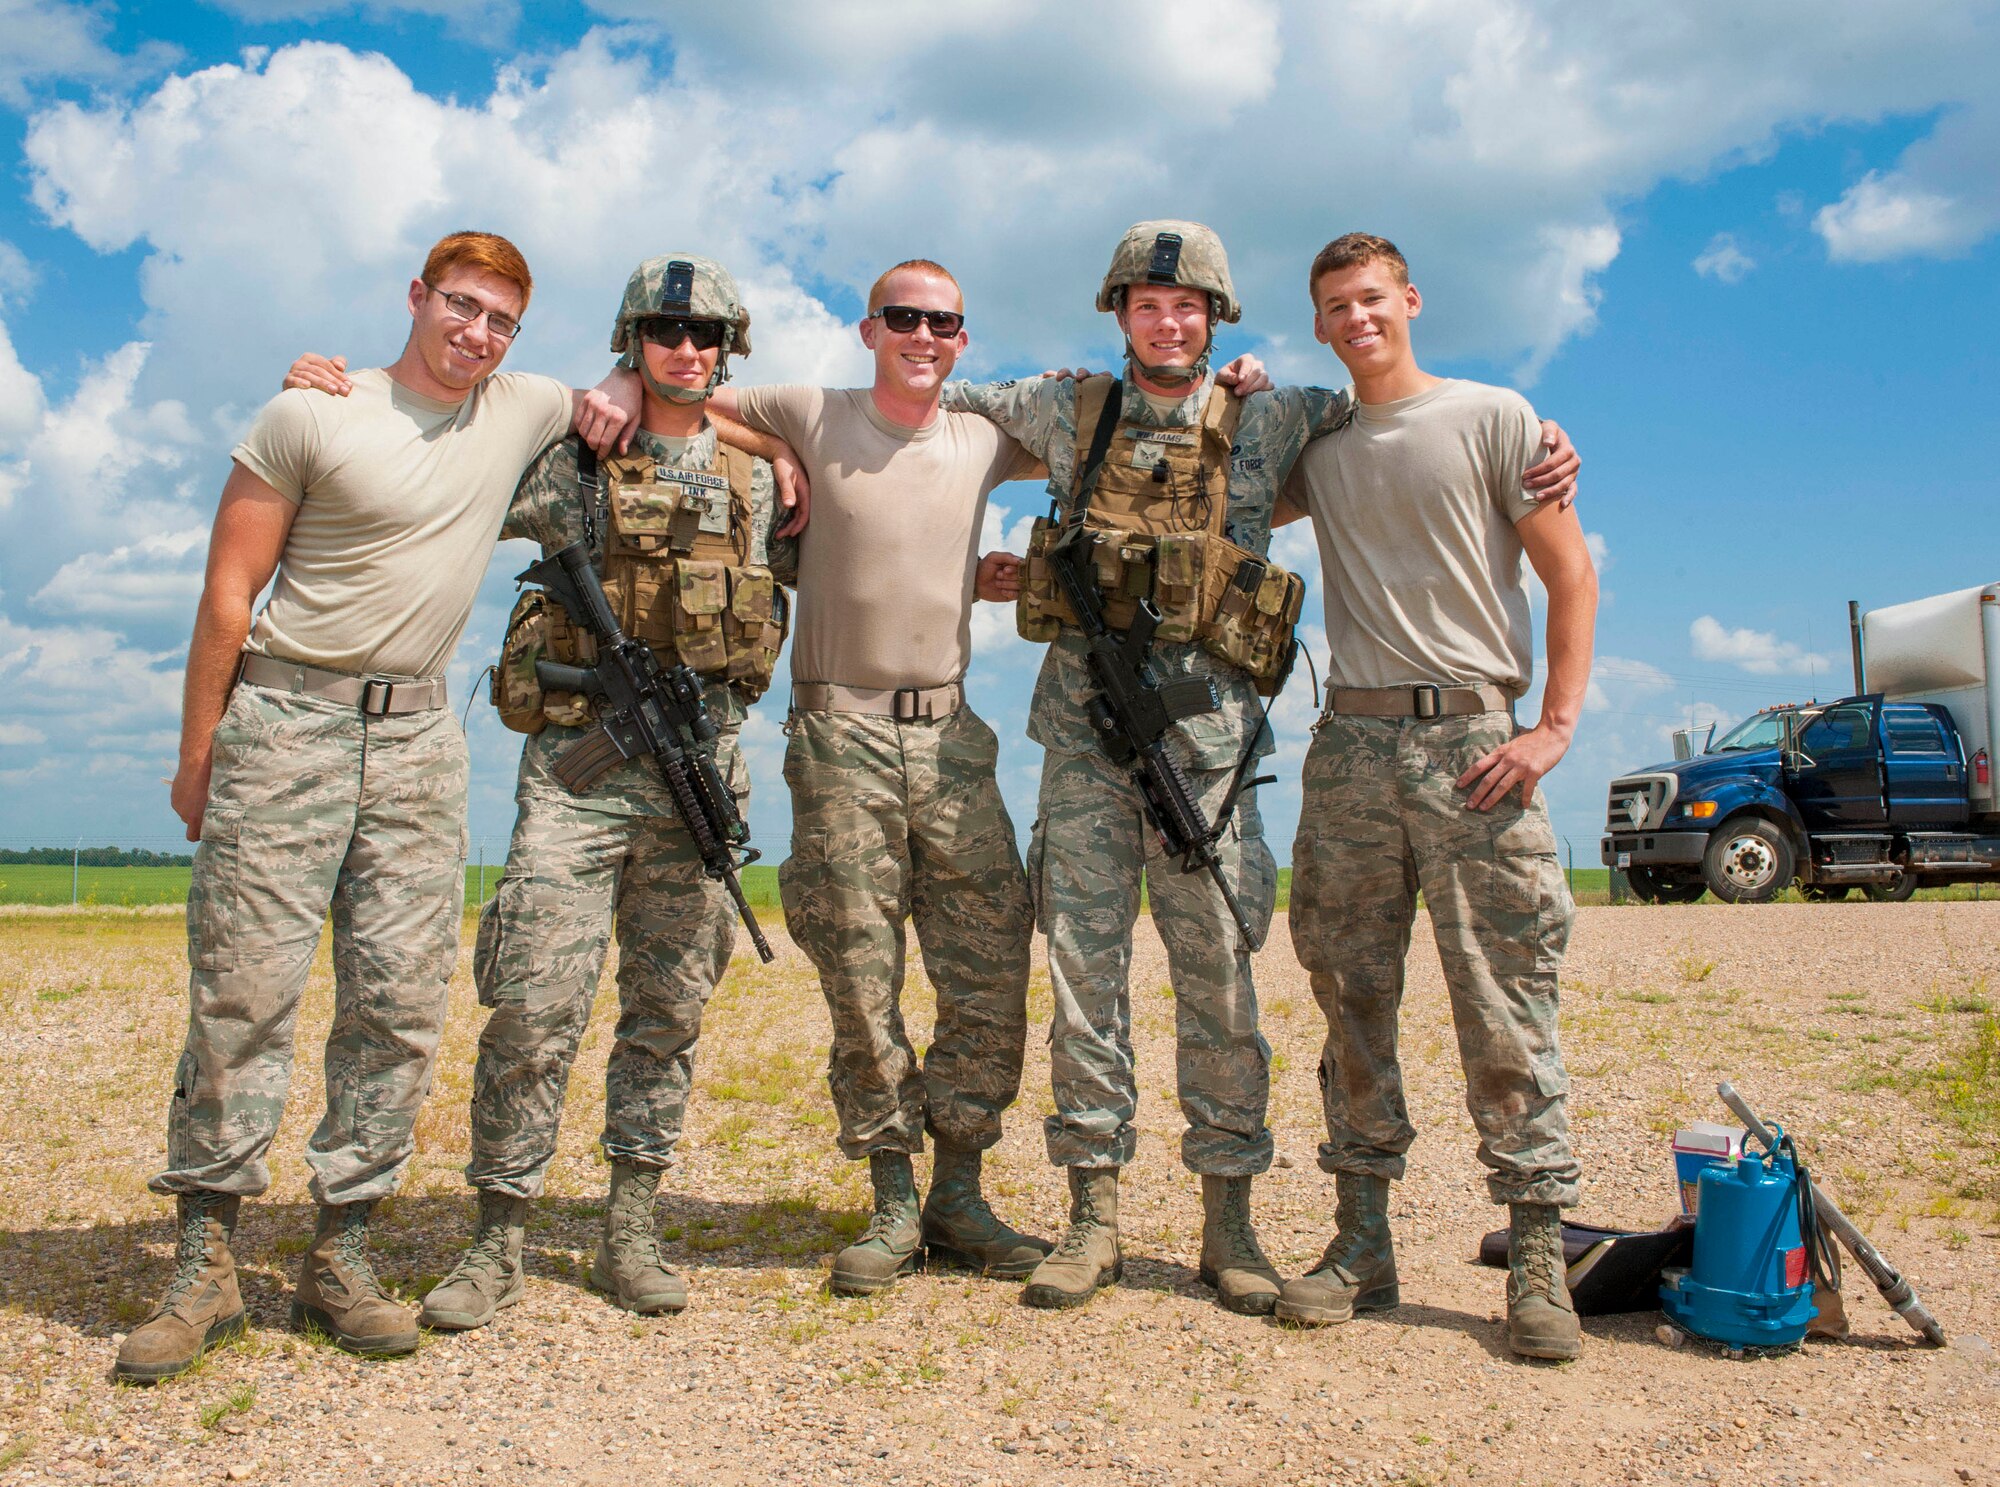 (from left to right) Airman 1st Class Alex Swarm, 91st Missile Maintenance Squadron periodic maintenance technician, Airman Jordan Link, 791st Missile Security Forces Squadron response force team member, Staff Sgt. Michael Swain 91st MMXS facility maintenance team instructor, Senior Airman Garrett Williams, 791st MSFS response force team leader and Airman 1st Class James Aita, 91st MMXS facility maintenance technician, pose for a photograph during a morale visit to the missile complex in North Dakota, July 30, 2014. 91st MSFS Airmen and 91st MMXS Airmen work side by side to ensure the safety, security and effectiveness of the nation’s assets. (U.S. Air Force photo/Senior Airman Stephanie Morris)